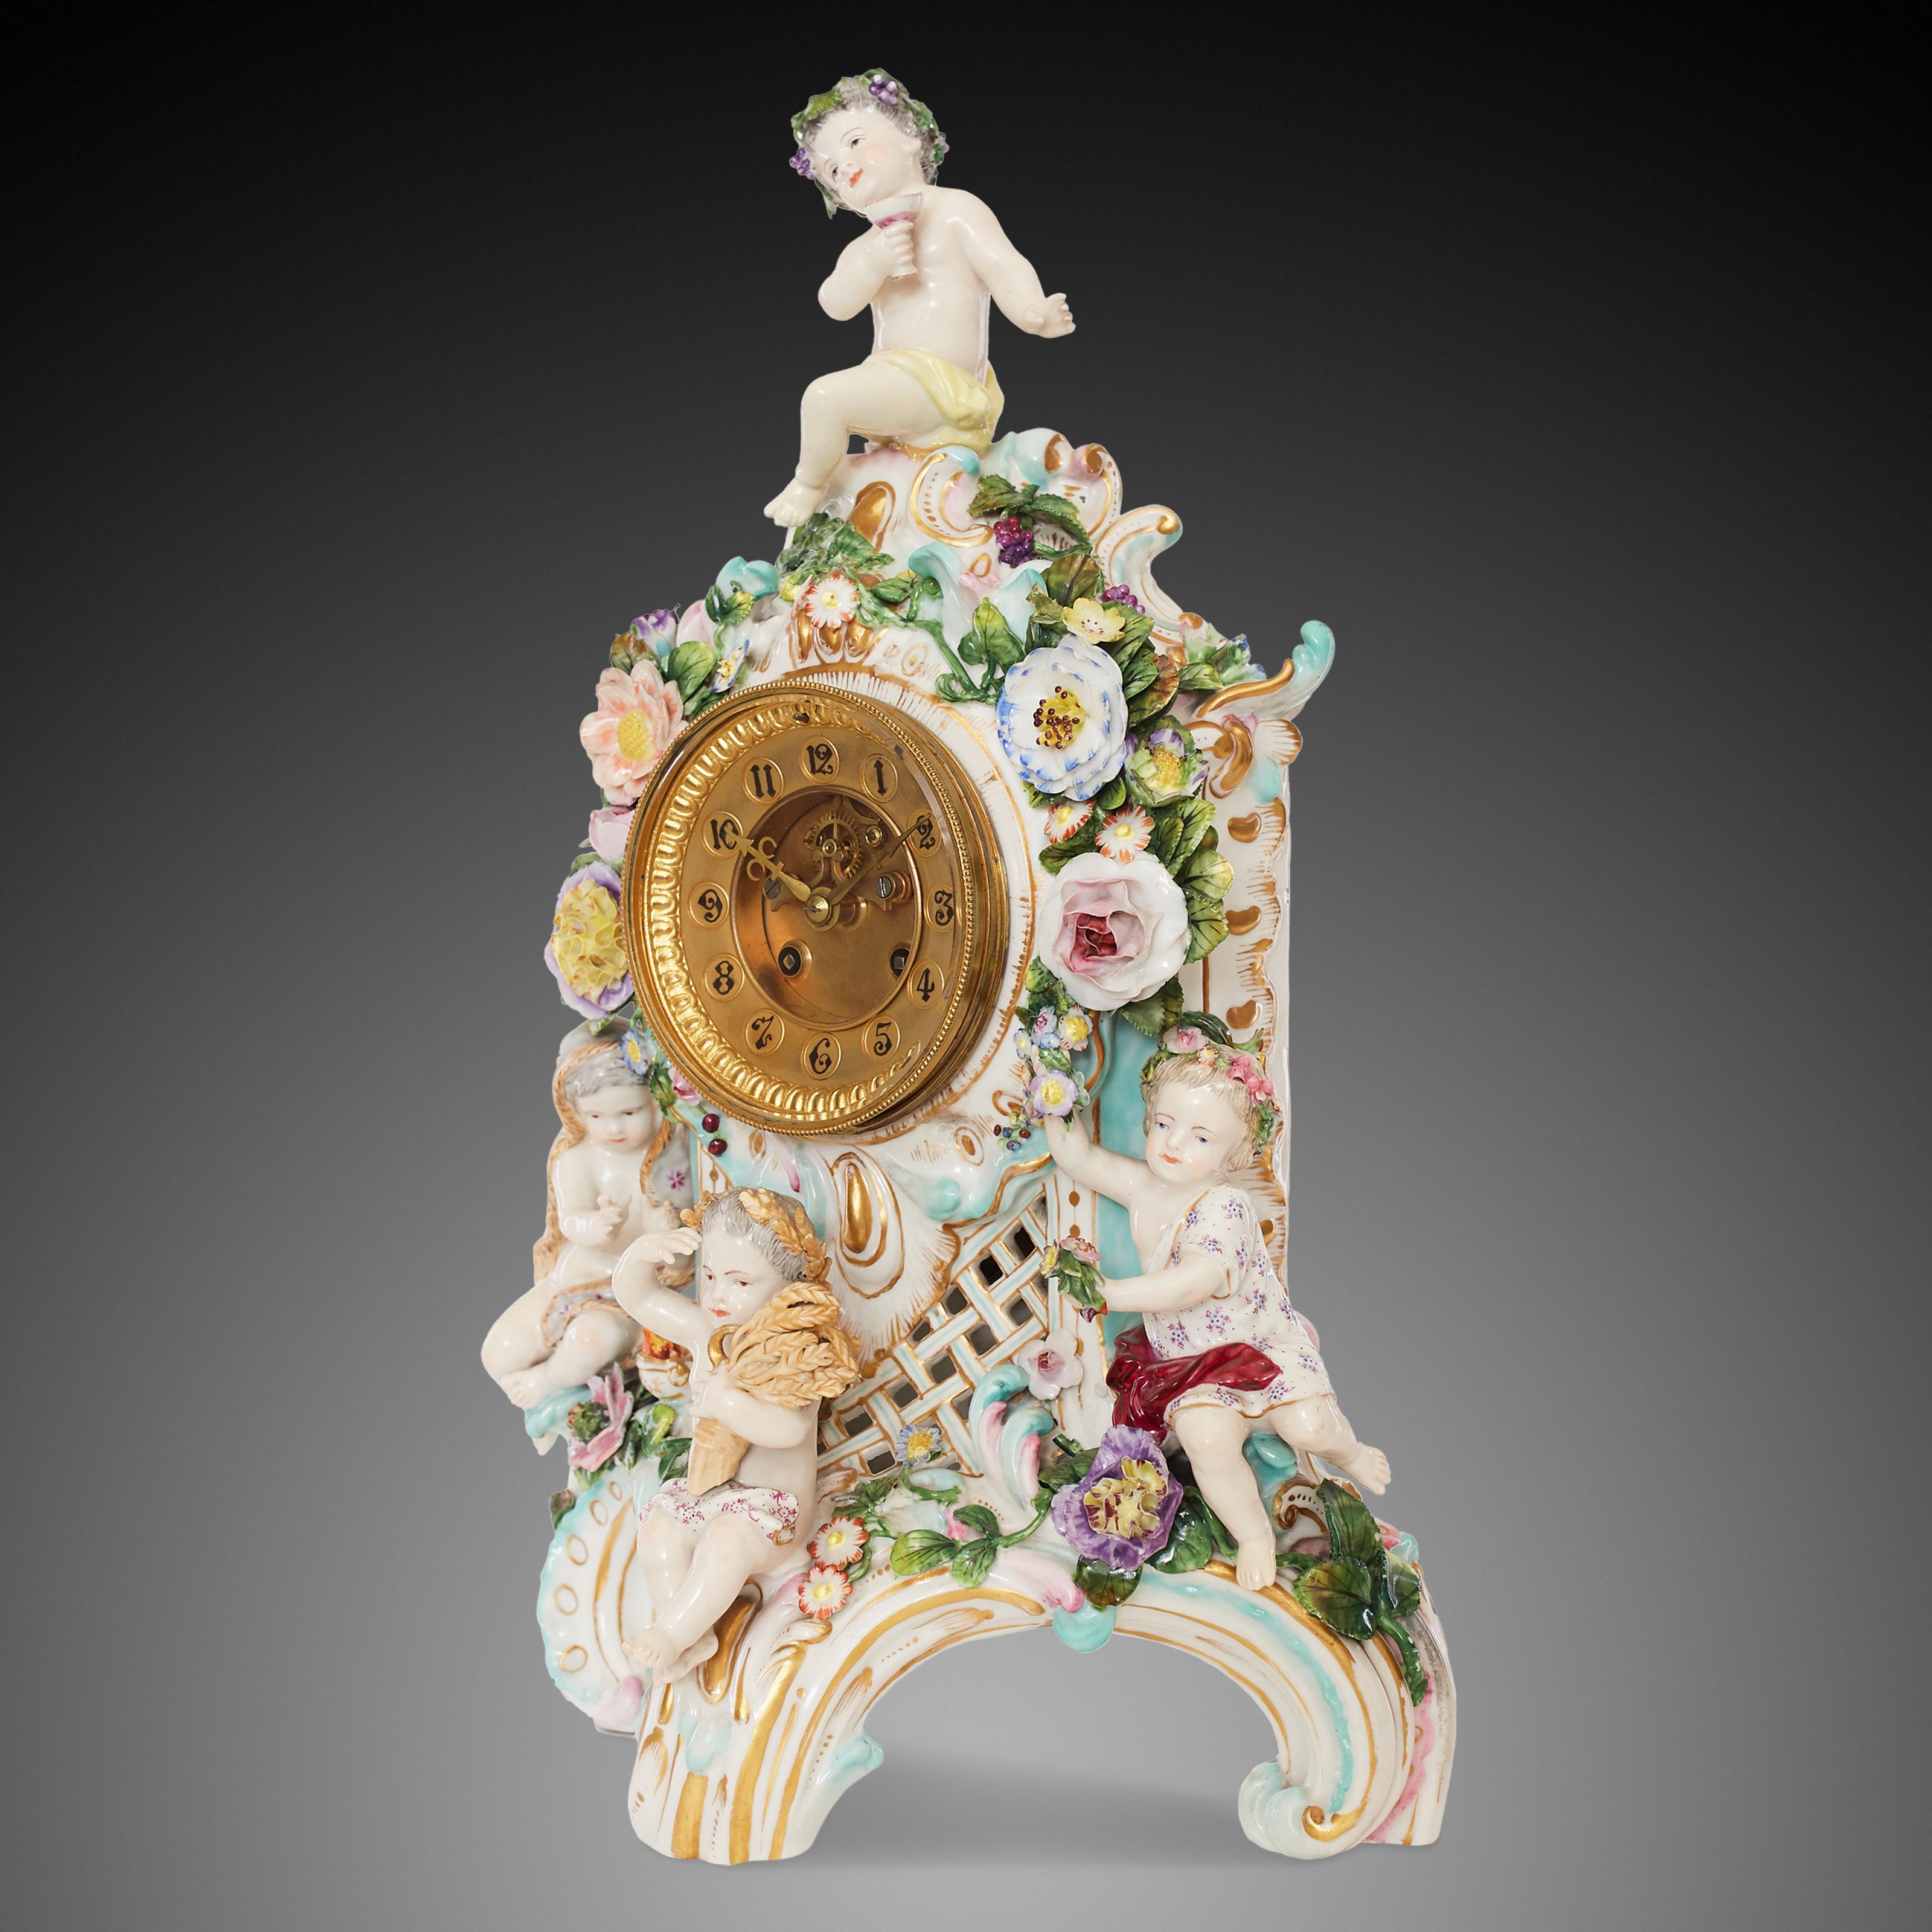 This 19th-century German Rococo style porcelain clock is decorated with colourful figures and flowers.
The clock features four putti, each one represents a different season. Summer is represented by the surmounting putto, shown holding a chalice